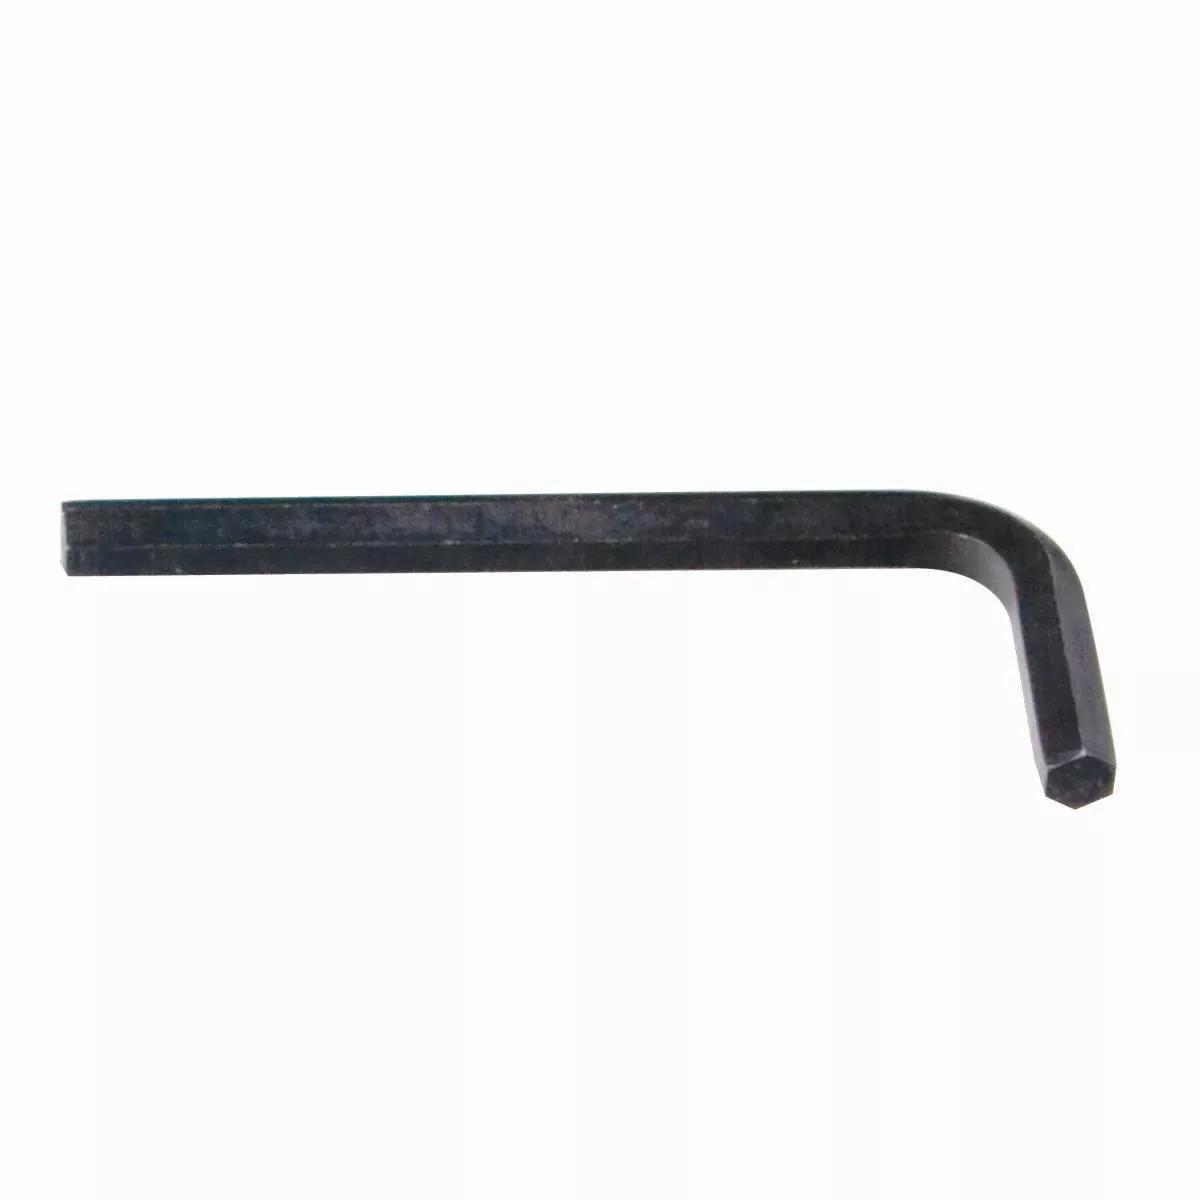 1/8" Long Arm Hex Key Wrench